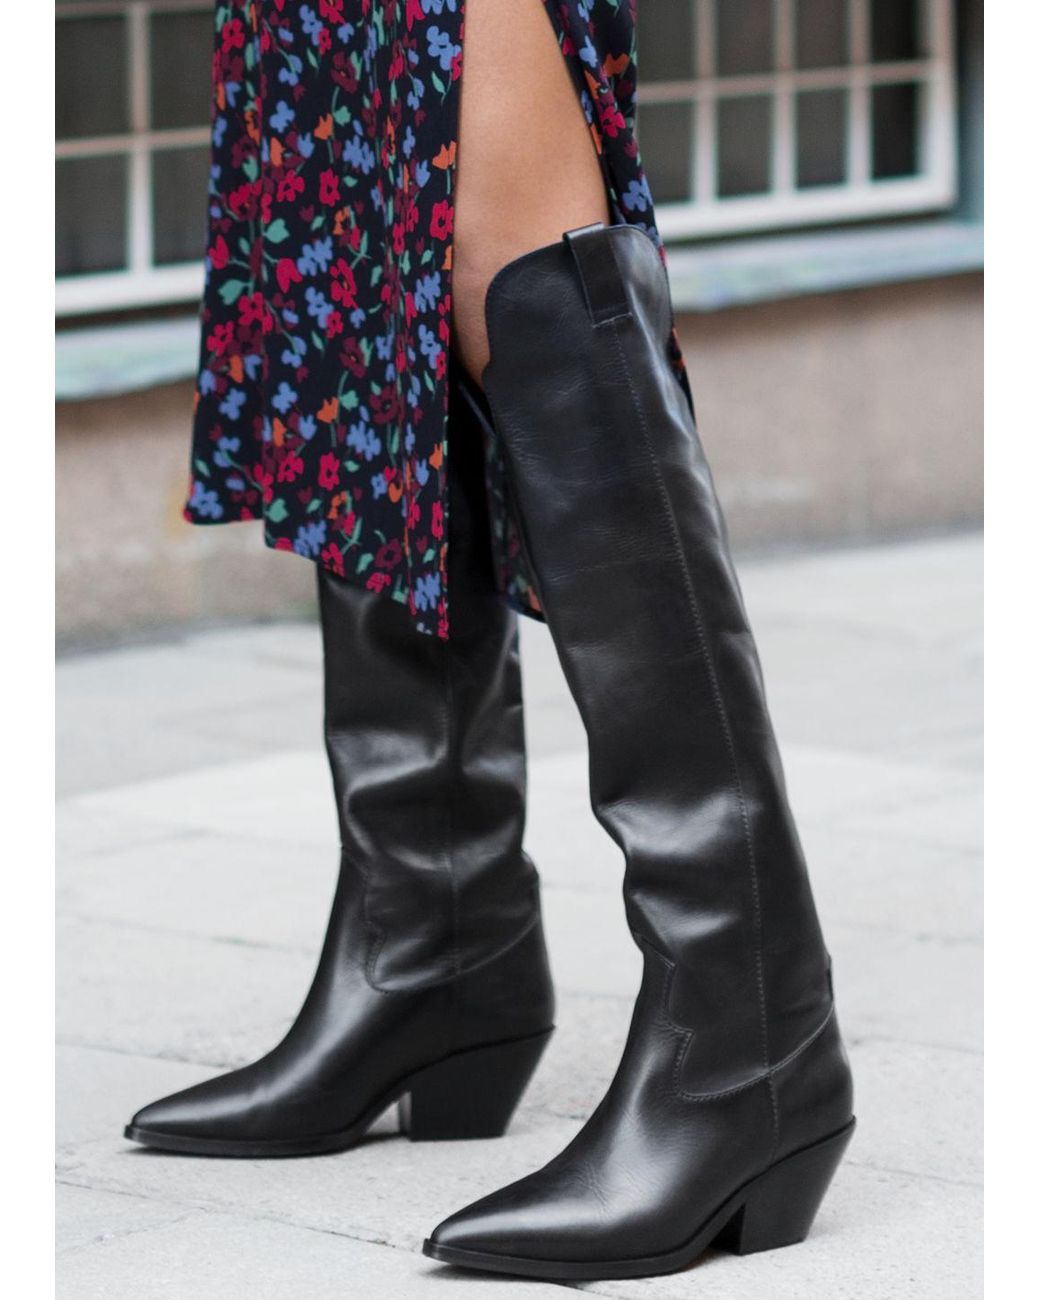 & Other Stories Knee High Cowboy Boots in Black | Lyst